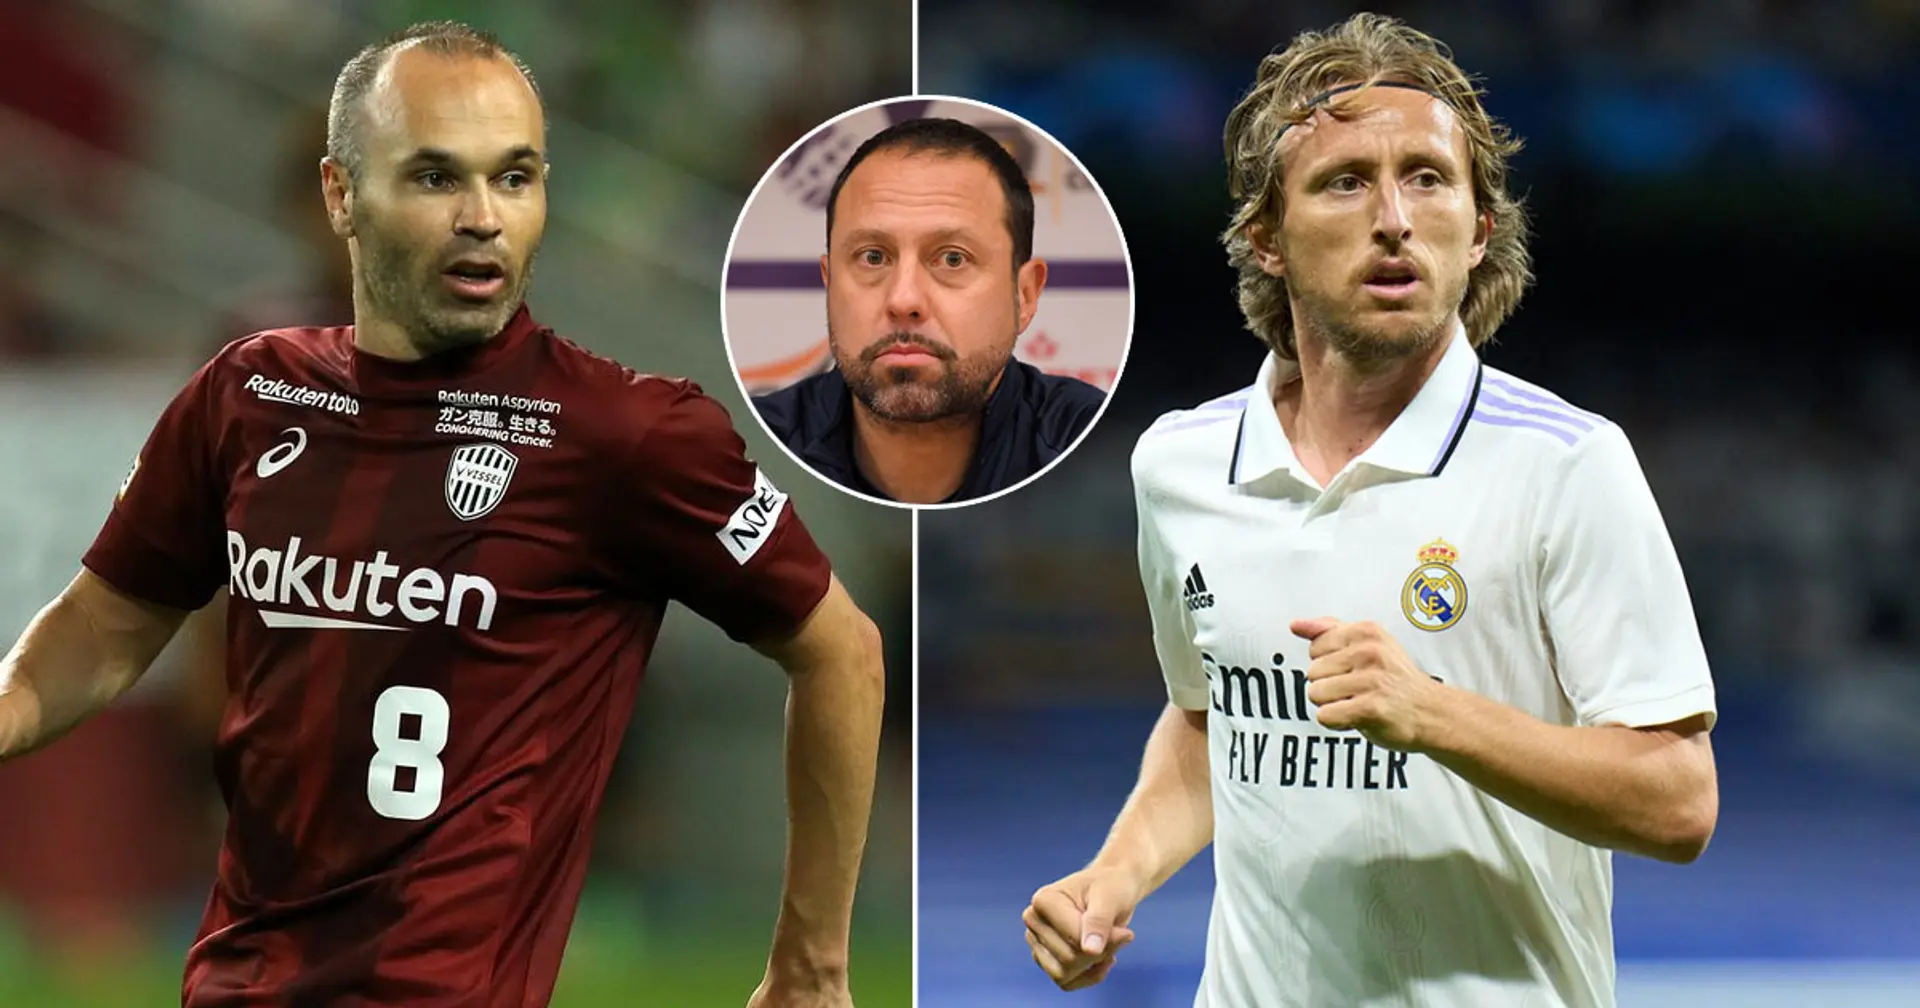 Shakhtar coach claims Modric is better than Xavi and Iniesta for one reason